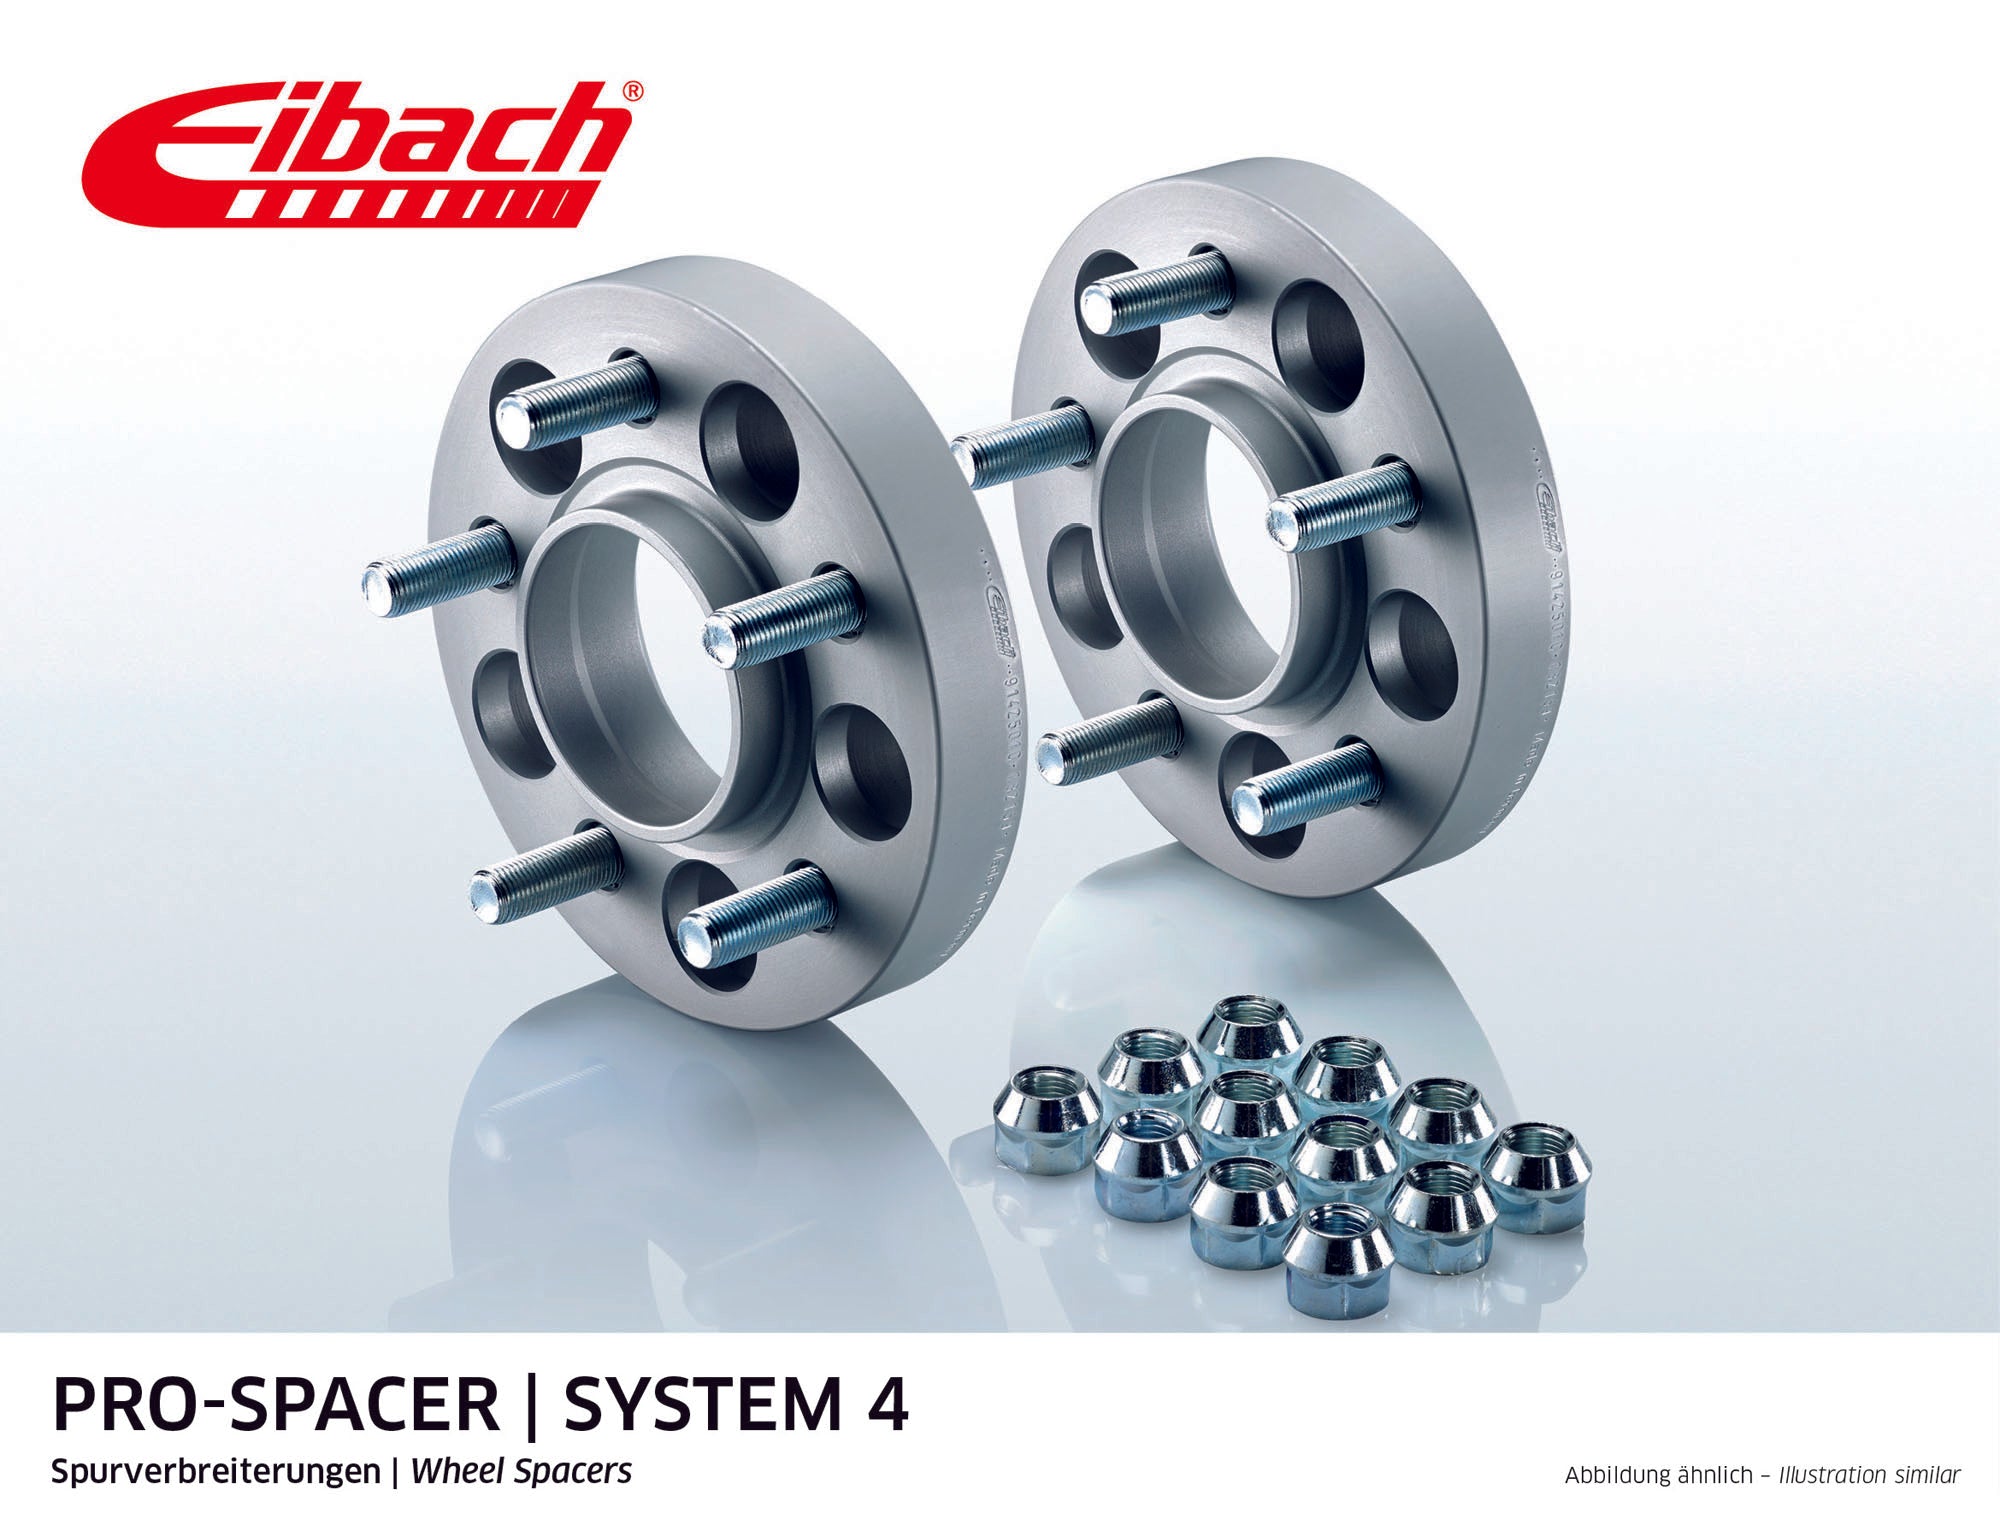 Eibach 28mm Pro-Spacer - Silver Anodized Wheel Spacer 911 1993-97 #S90-4-28-001